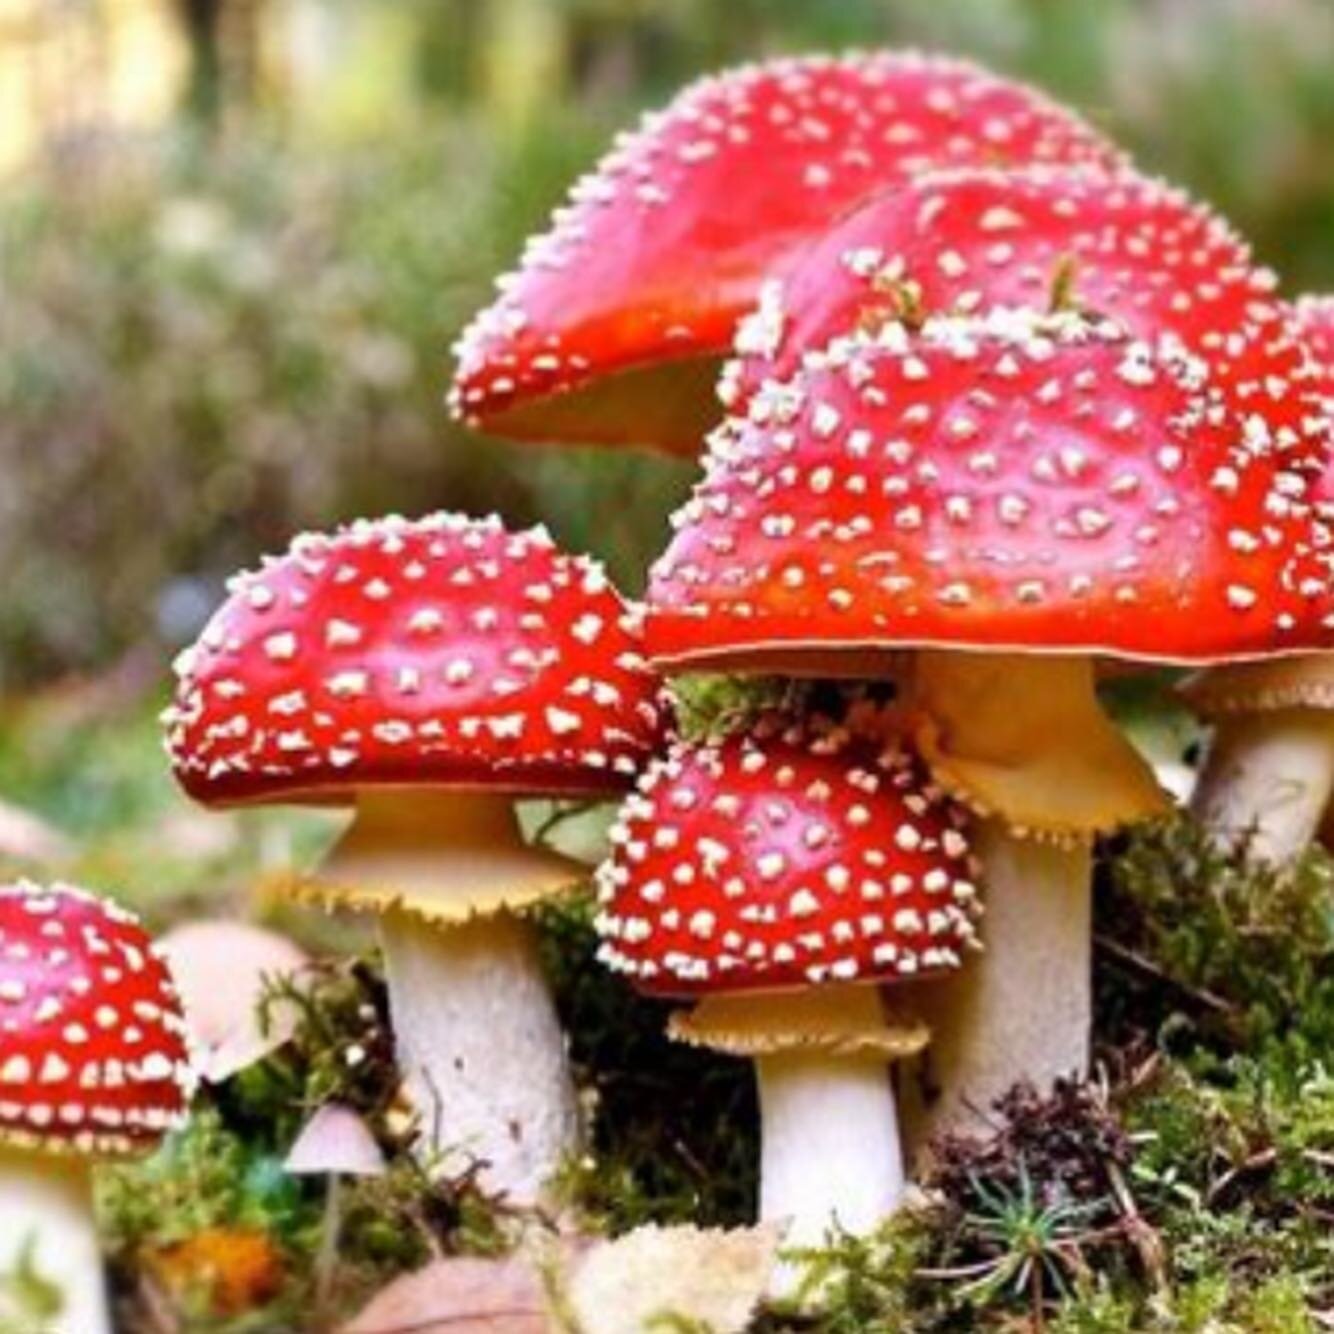 The Amanita Muscaria (or &lsquo;flying mushroom&rsquo;) 🍄❤️ 
Symbiont with pine 🌲 
Commonly found beneath pine trees, like gifts 🎁 
Medicinal and psychedelic when prepared by wise shaman; used in sacred ceremonies all over the world, particularly 